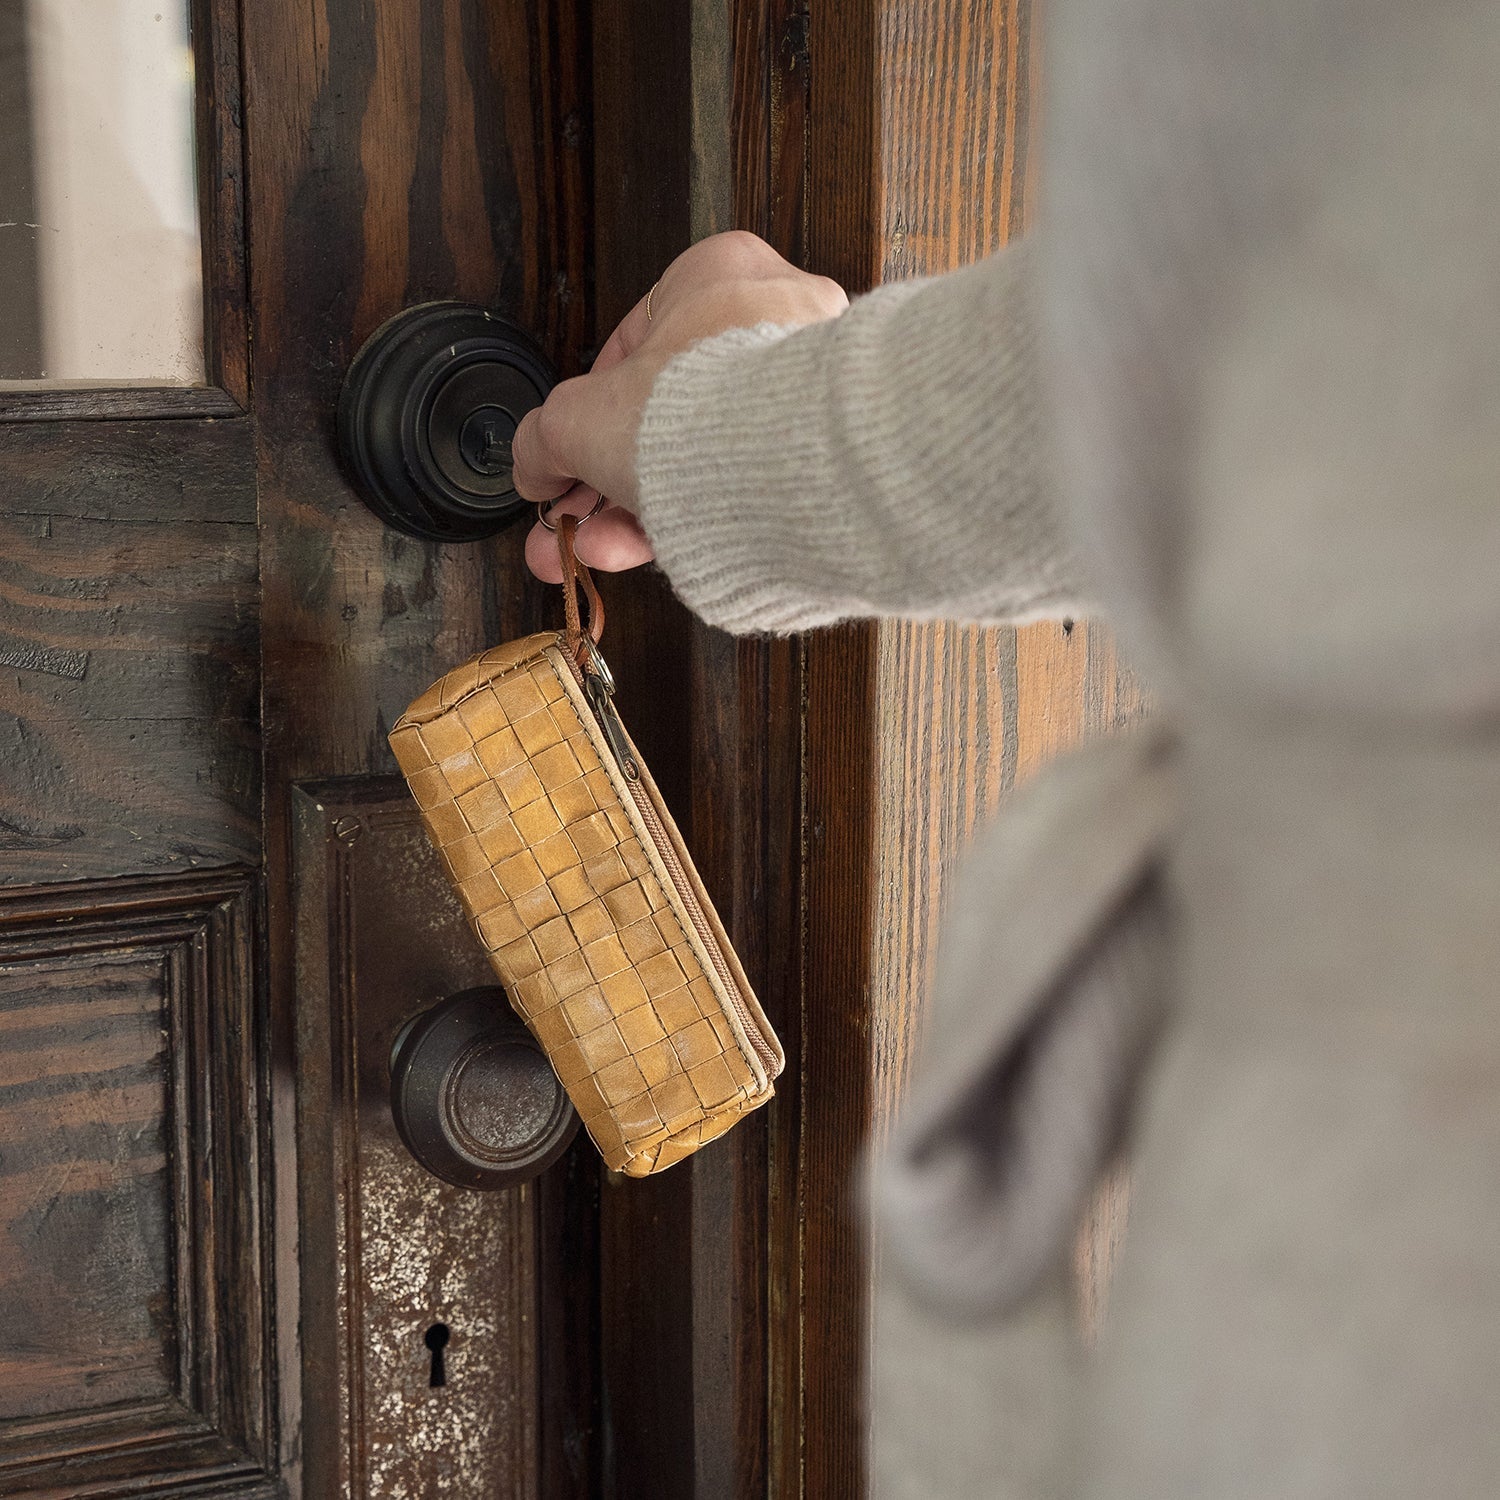 A person is shown unlocking a door with a key that is attached to a tan woven washable paper key holder.